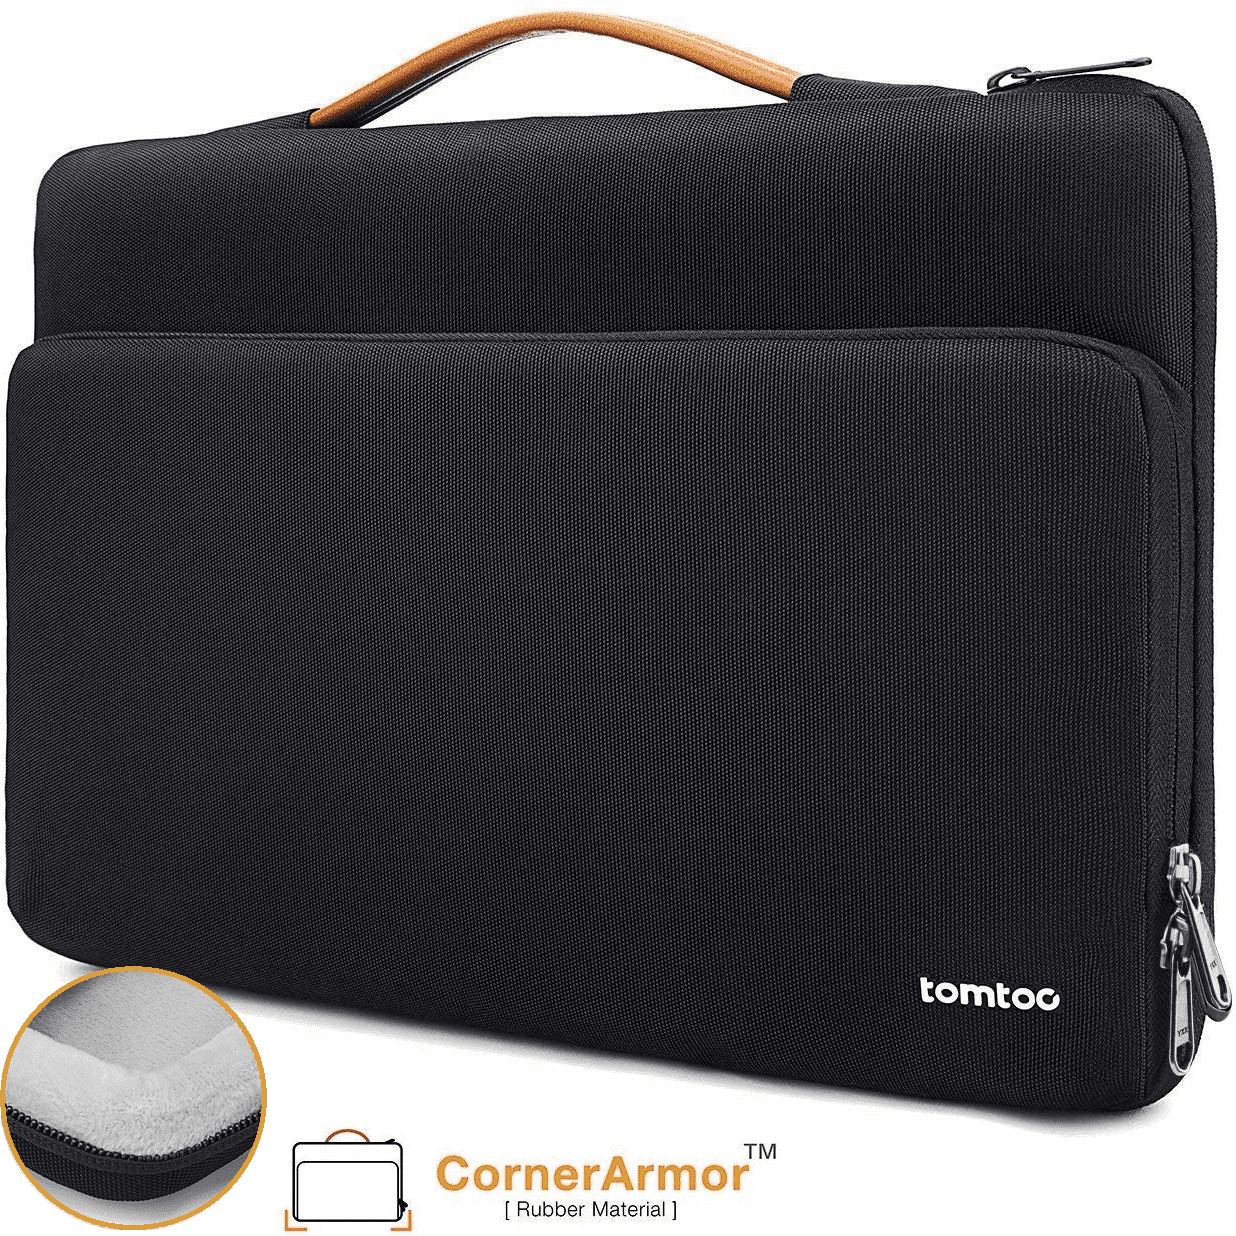 tomtoc 360 Protective Laptop Carrying Case for 15 inch New MacBook Pro ...